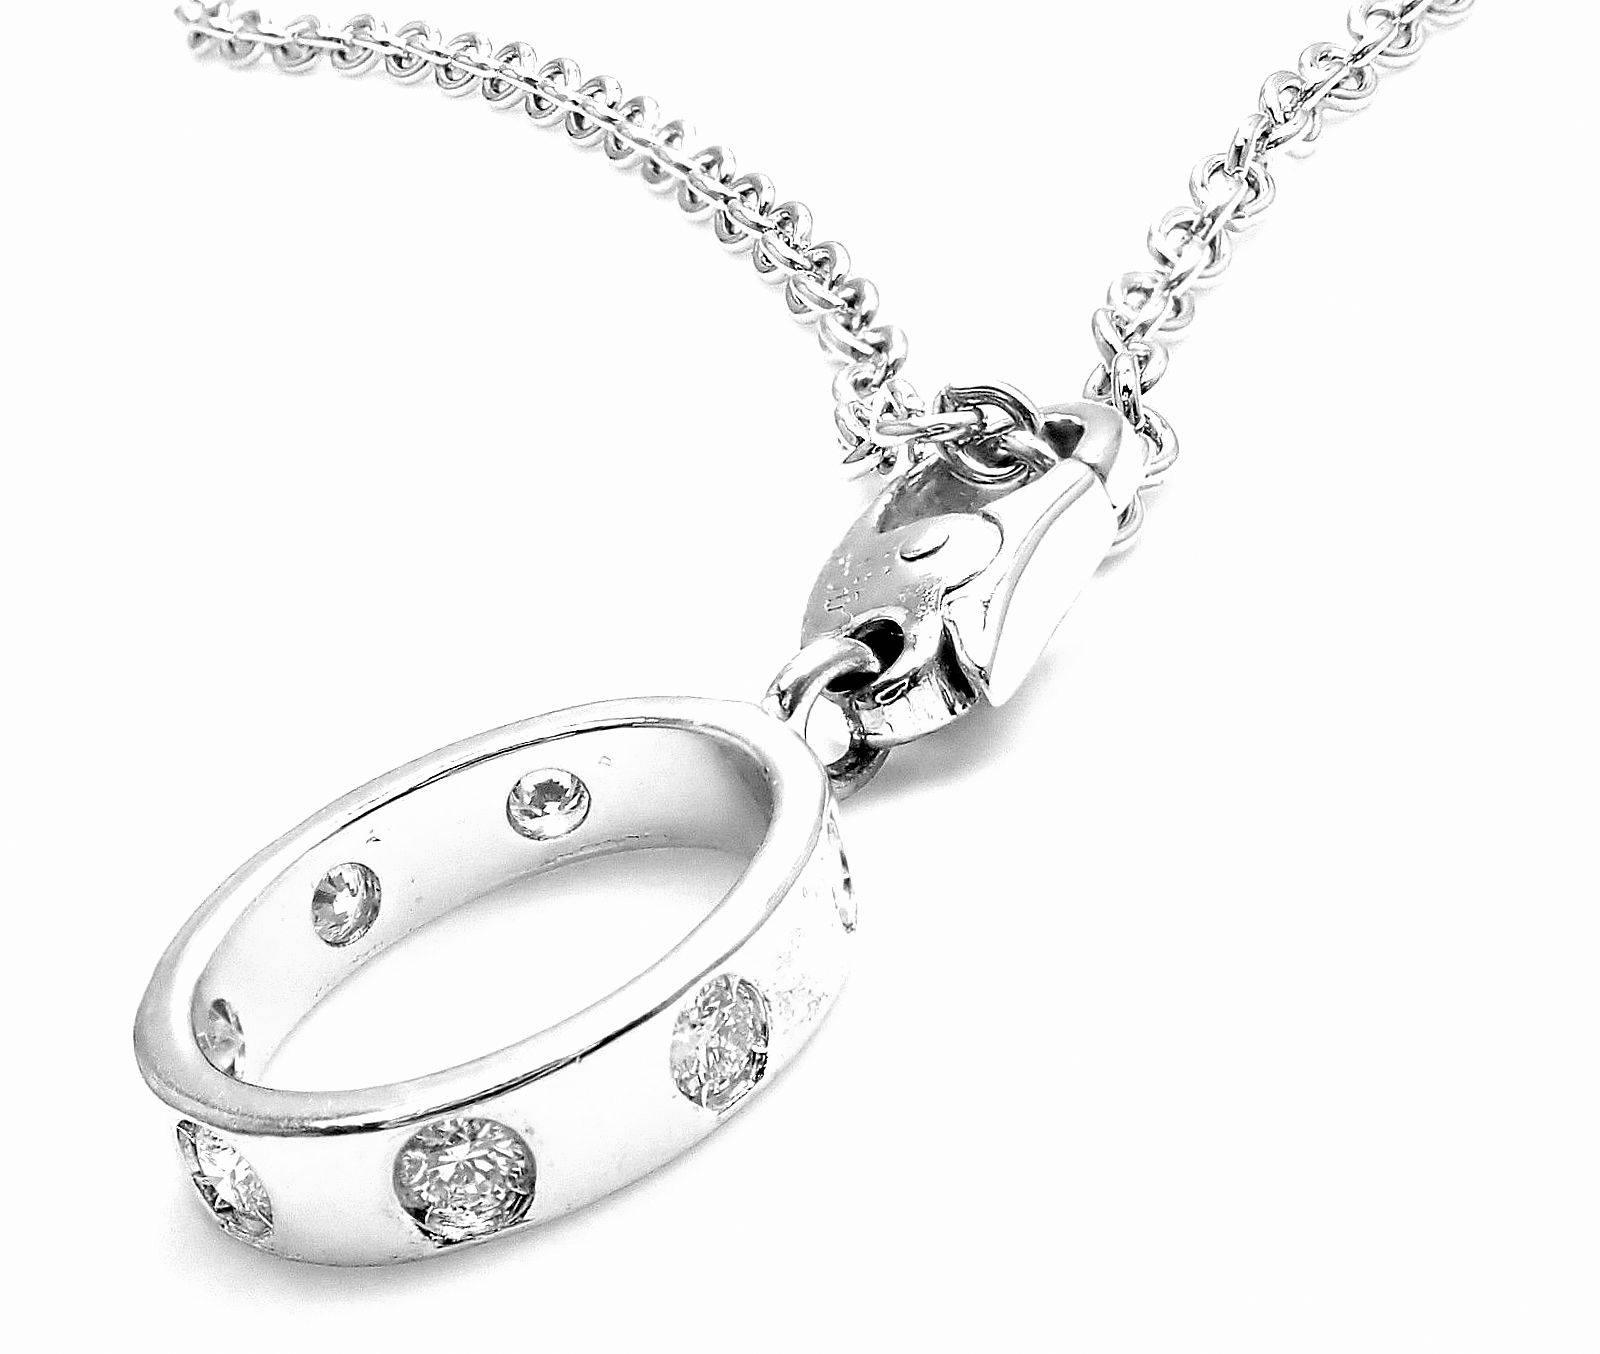 18k White Gold Diamond Love Charm Pendant Necklace by Cartier. 
With 7 round brilliant cut diamonds VS1 clarity, G color total weight approx. .33ct
Details: 
Measurements: Chain Length: 16.5